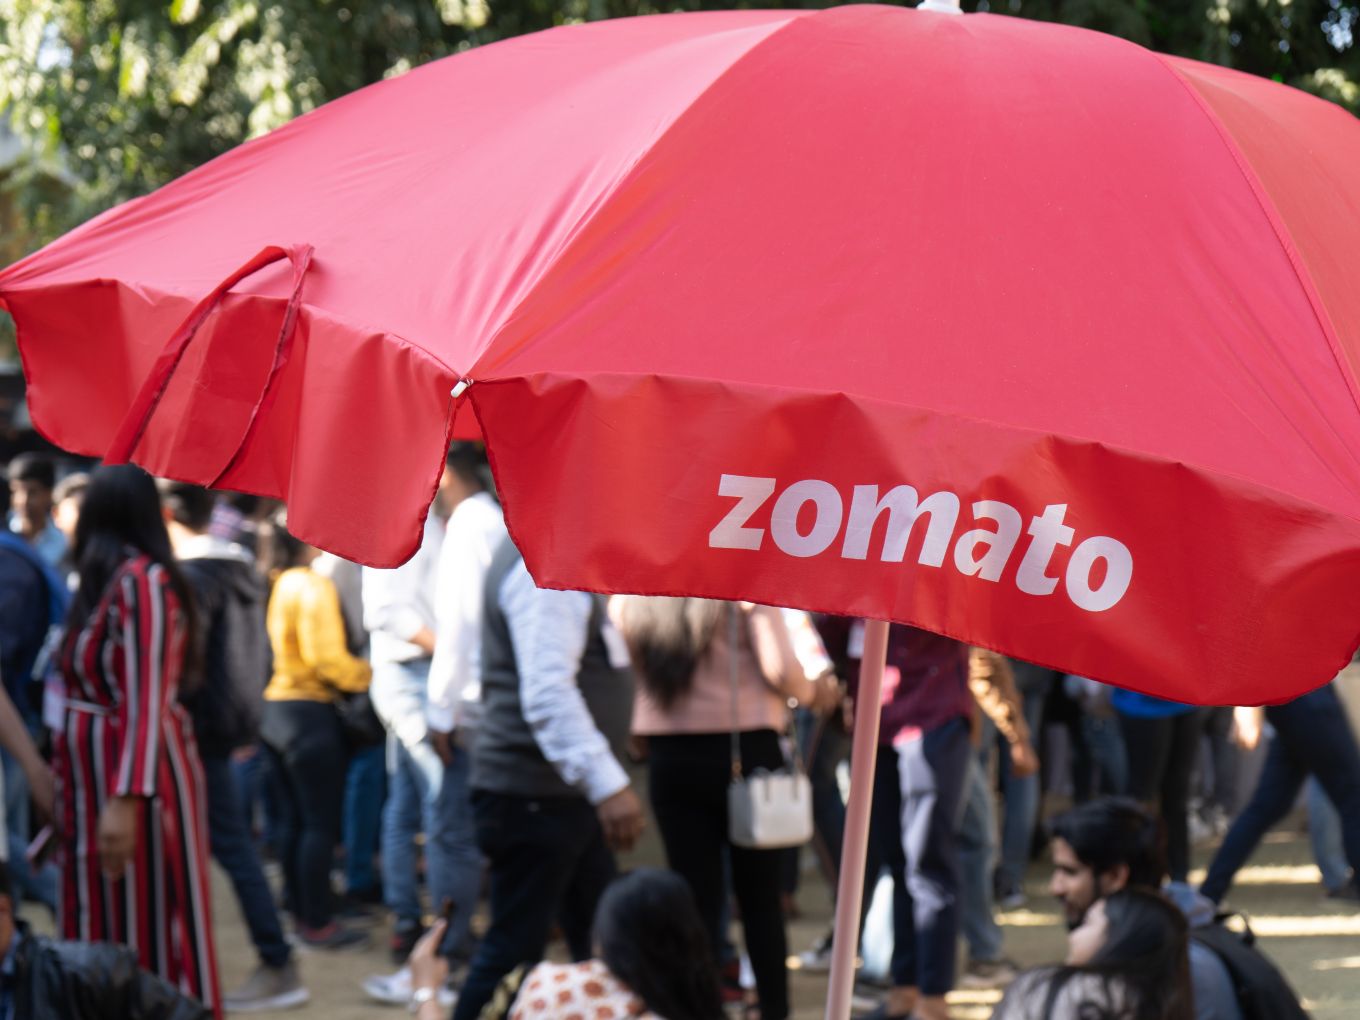 Zomato Closes $660 Mn Funding Round With 10 New Investors On Board